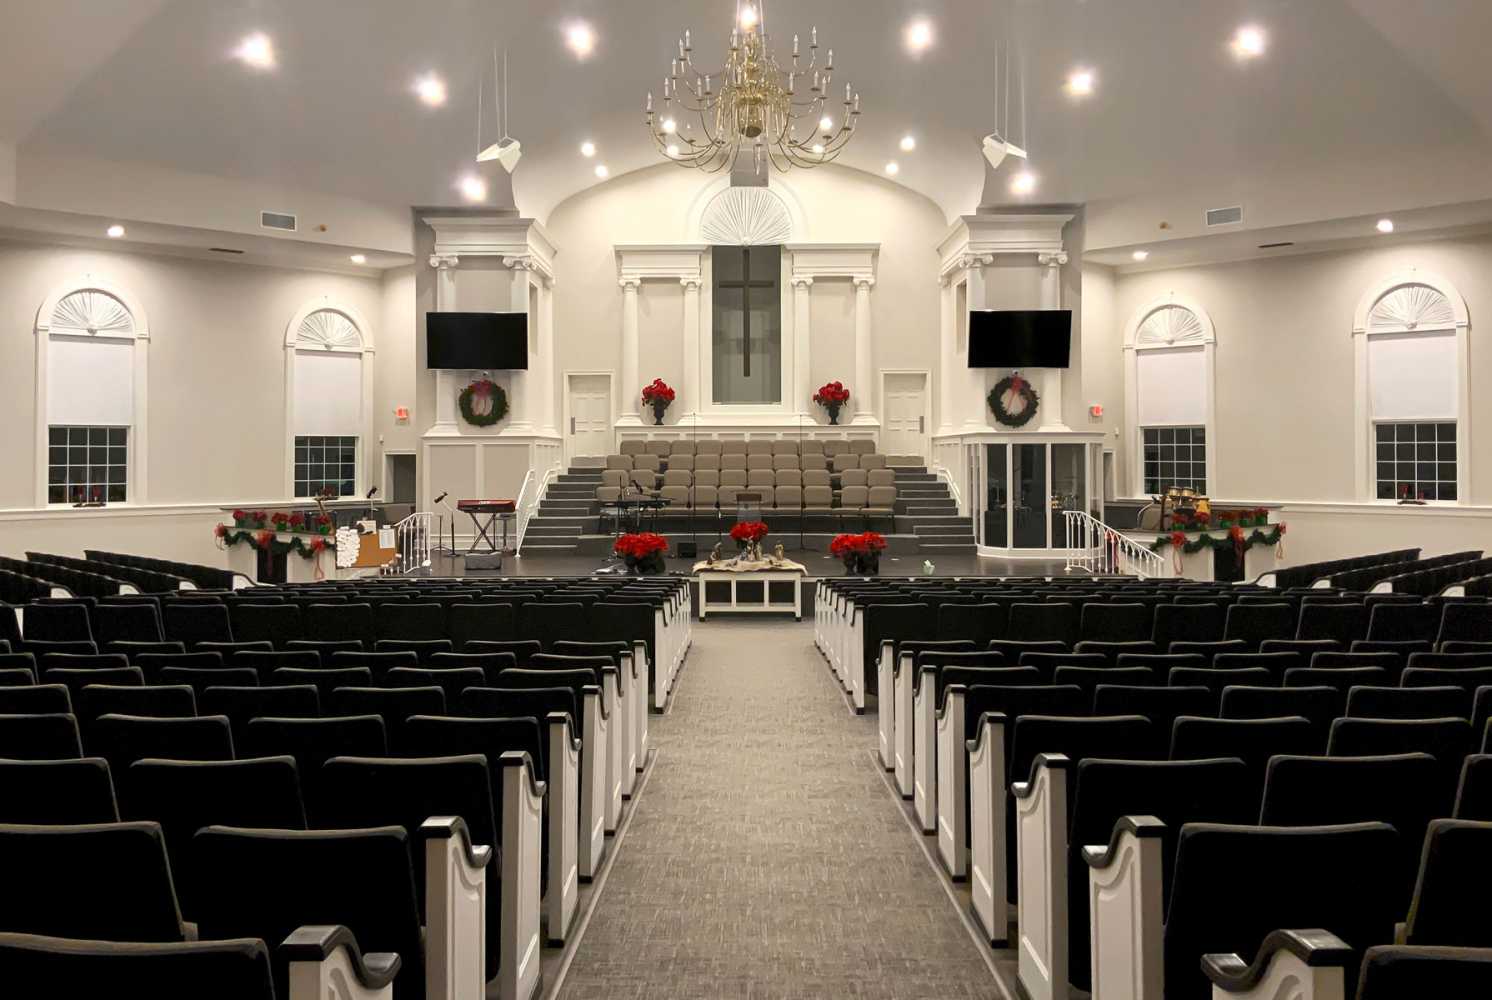 The Golden Isles Church of God serves the greater community of Brunswick, Georgia